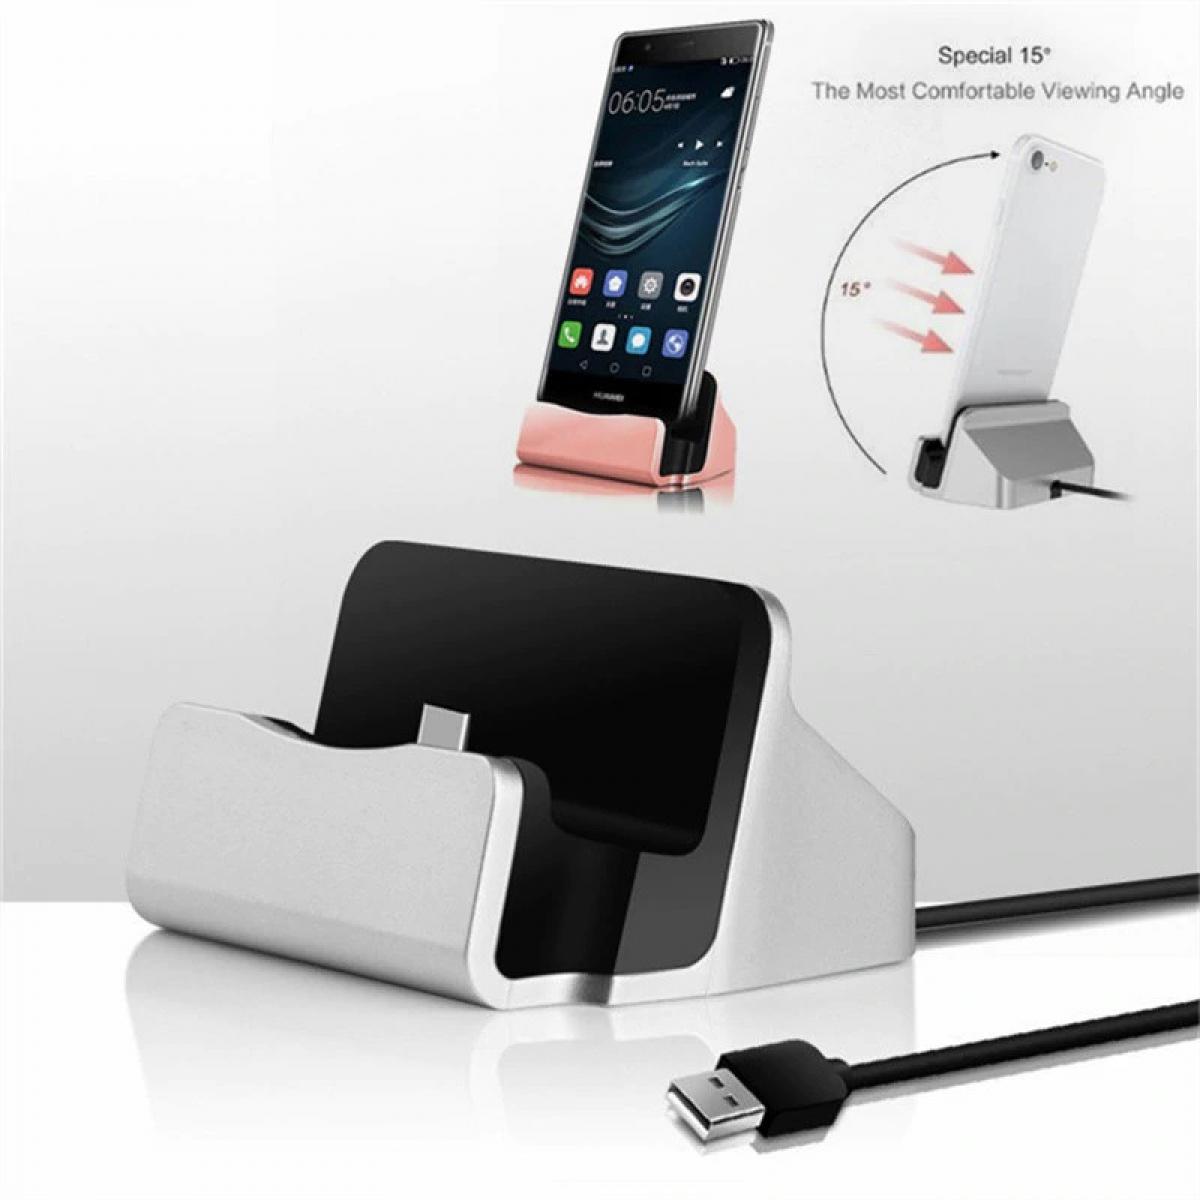 Shot - Station d'Accueil de Chargement pour SAMSUNG Galaxy A3 Smartphone Micro USB Support Chargeur Bureau (ROSE) - Station d'accueil smartphone